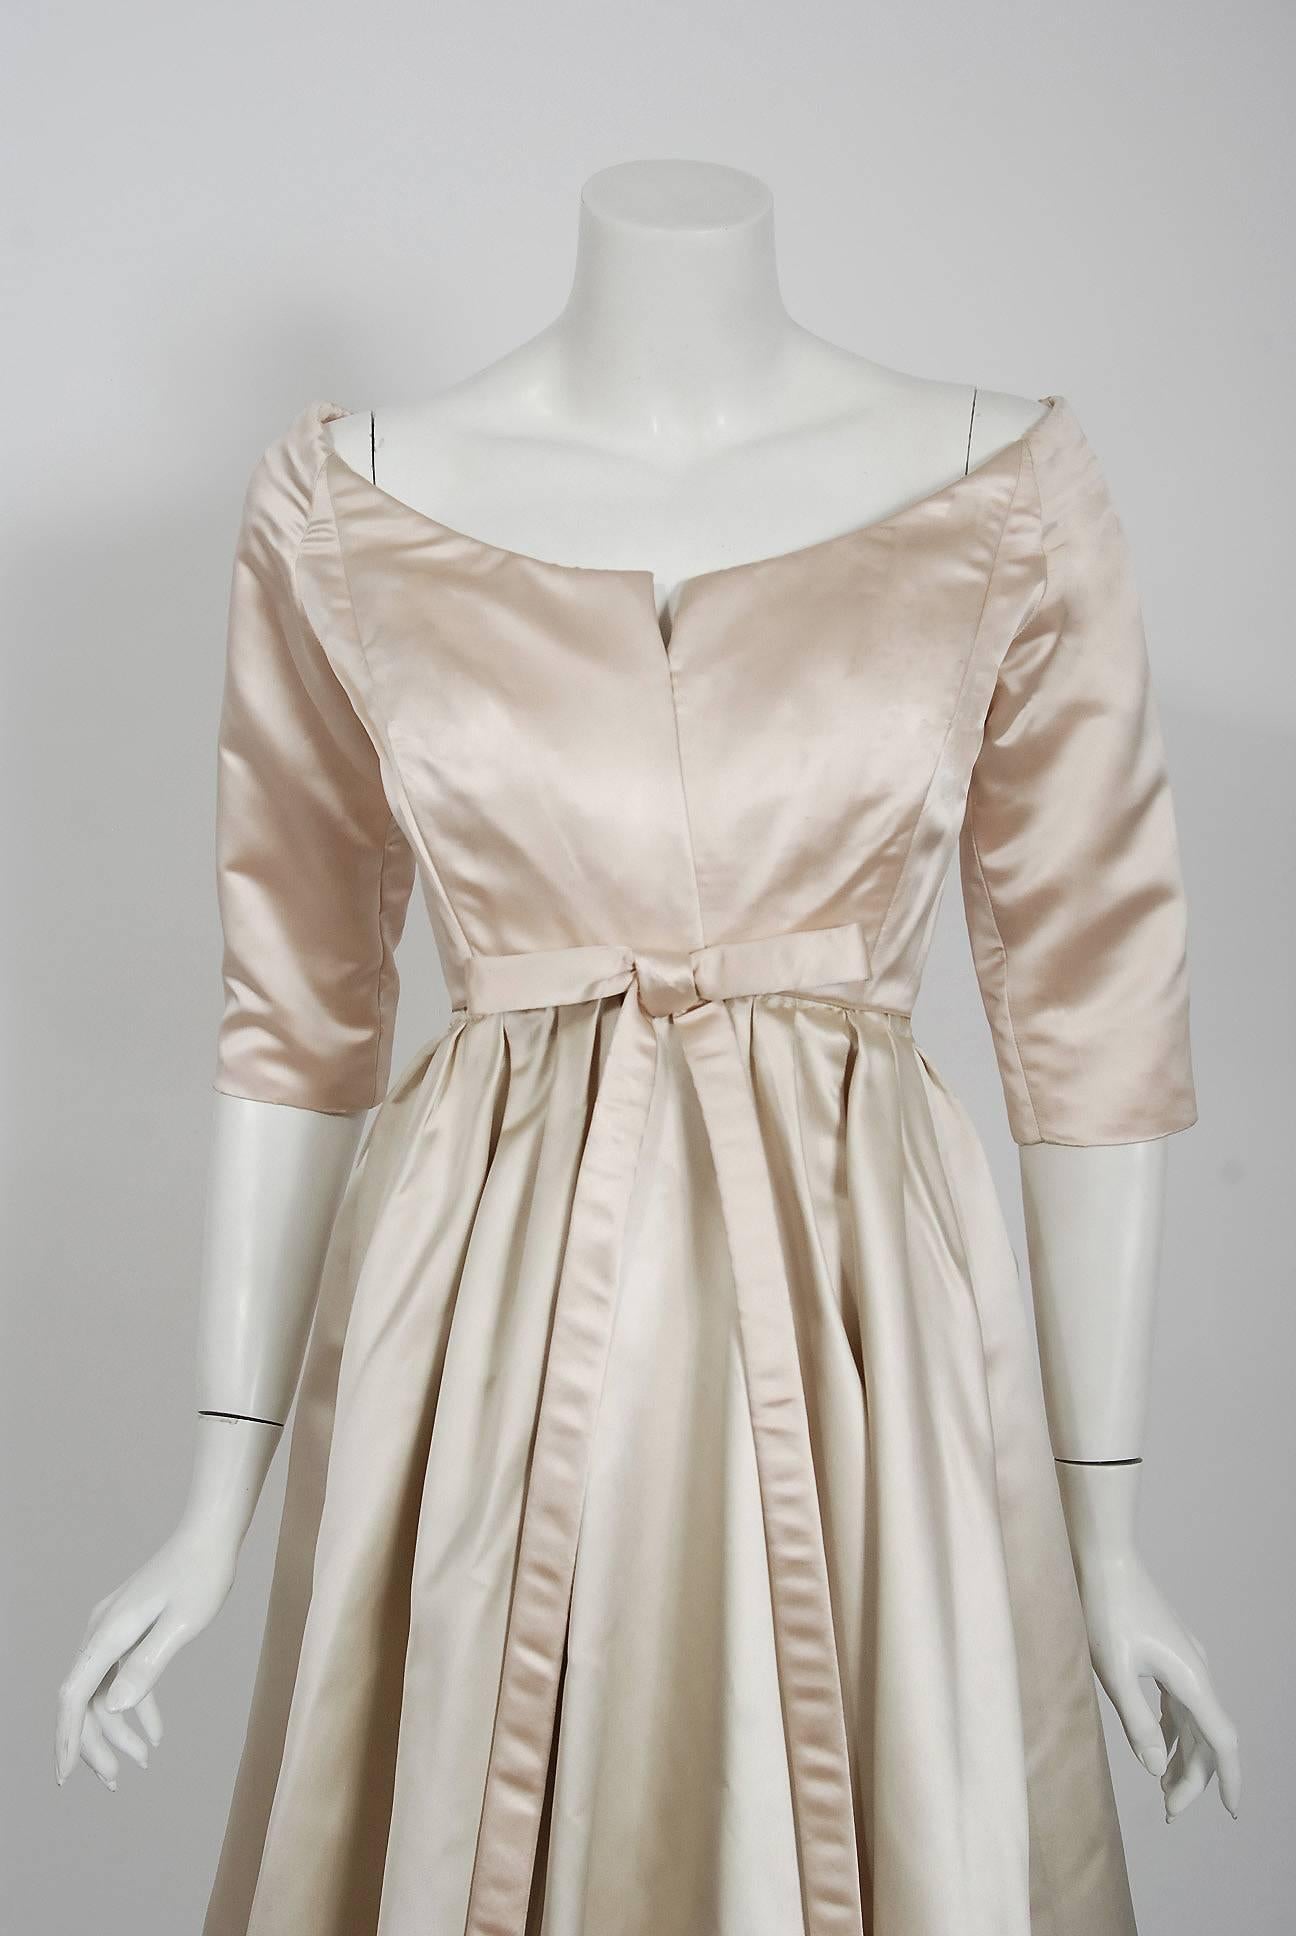 We are pleased to offer this important and incredibly rare documented party dress from the Christian Dior Couture collection of 1959 when Yves Saint Laurent was head designer. Yves Saint Laurent continued the Dior tradition of elegant construction